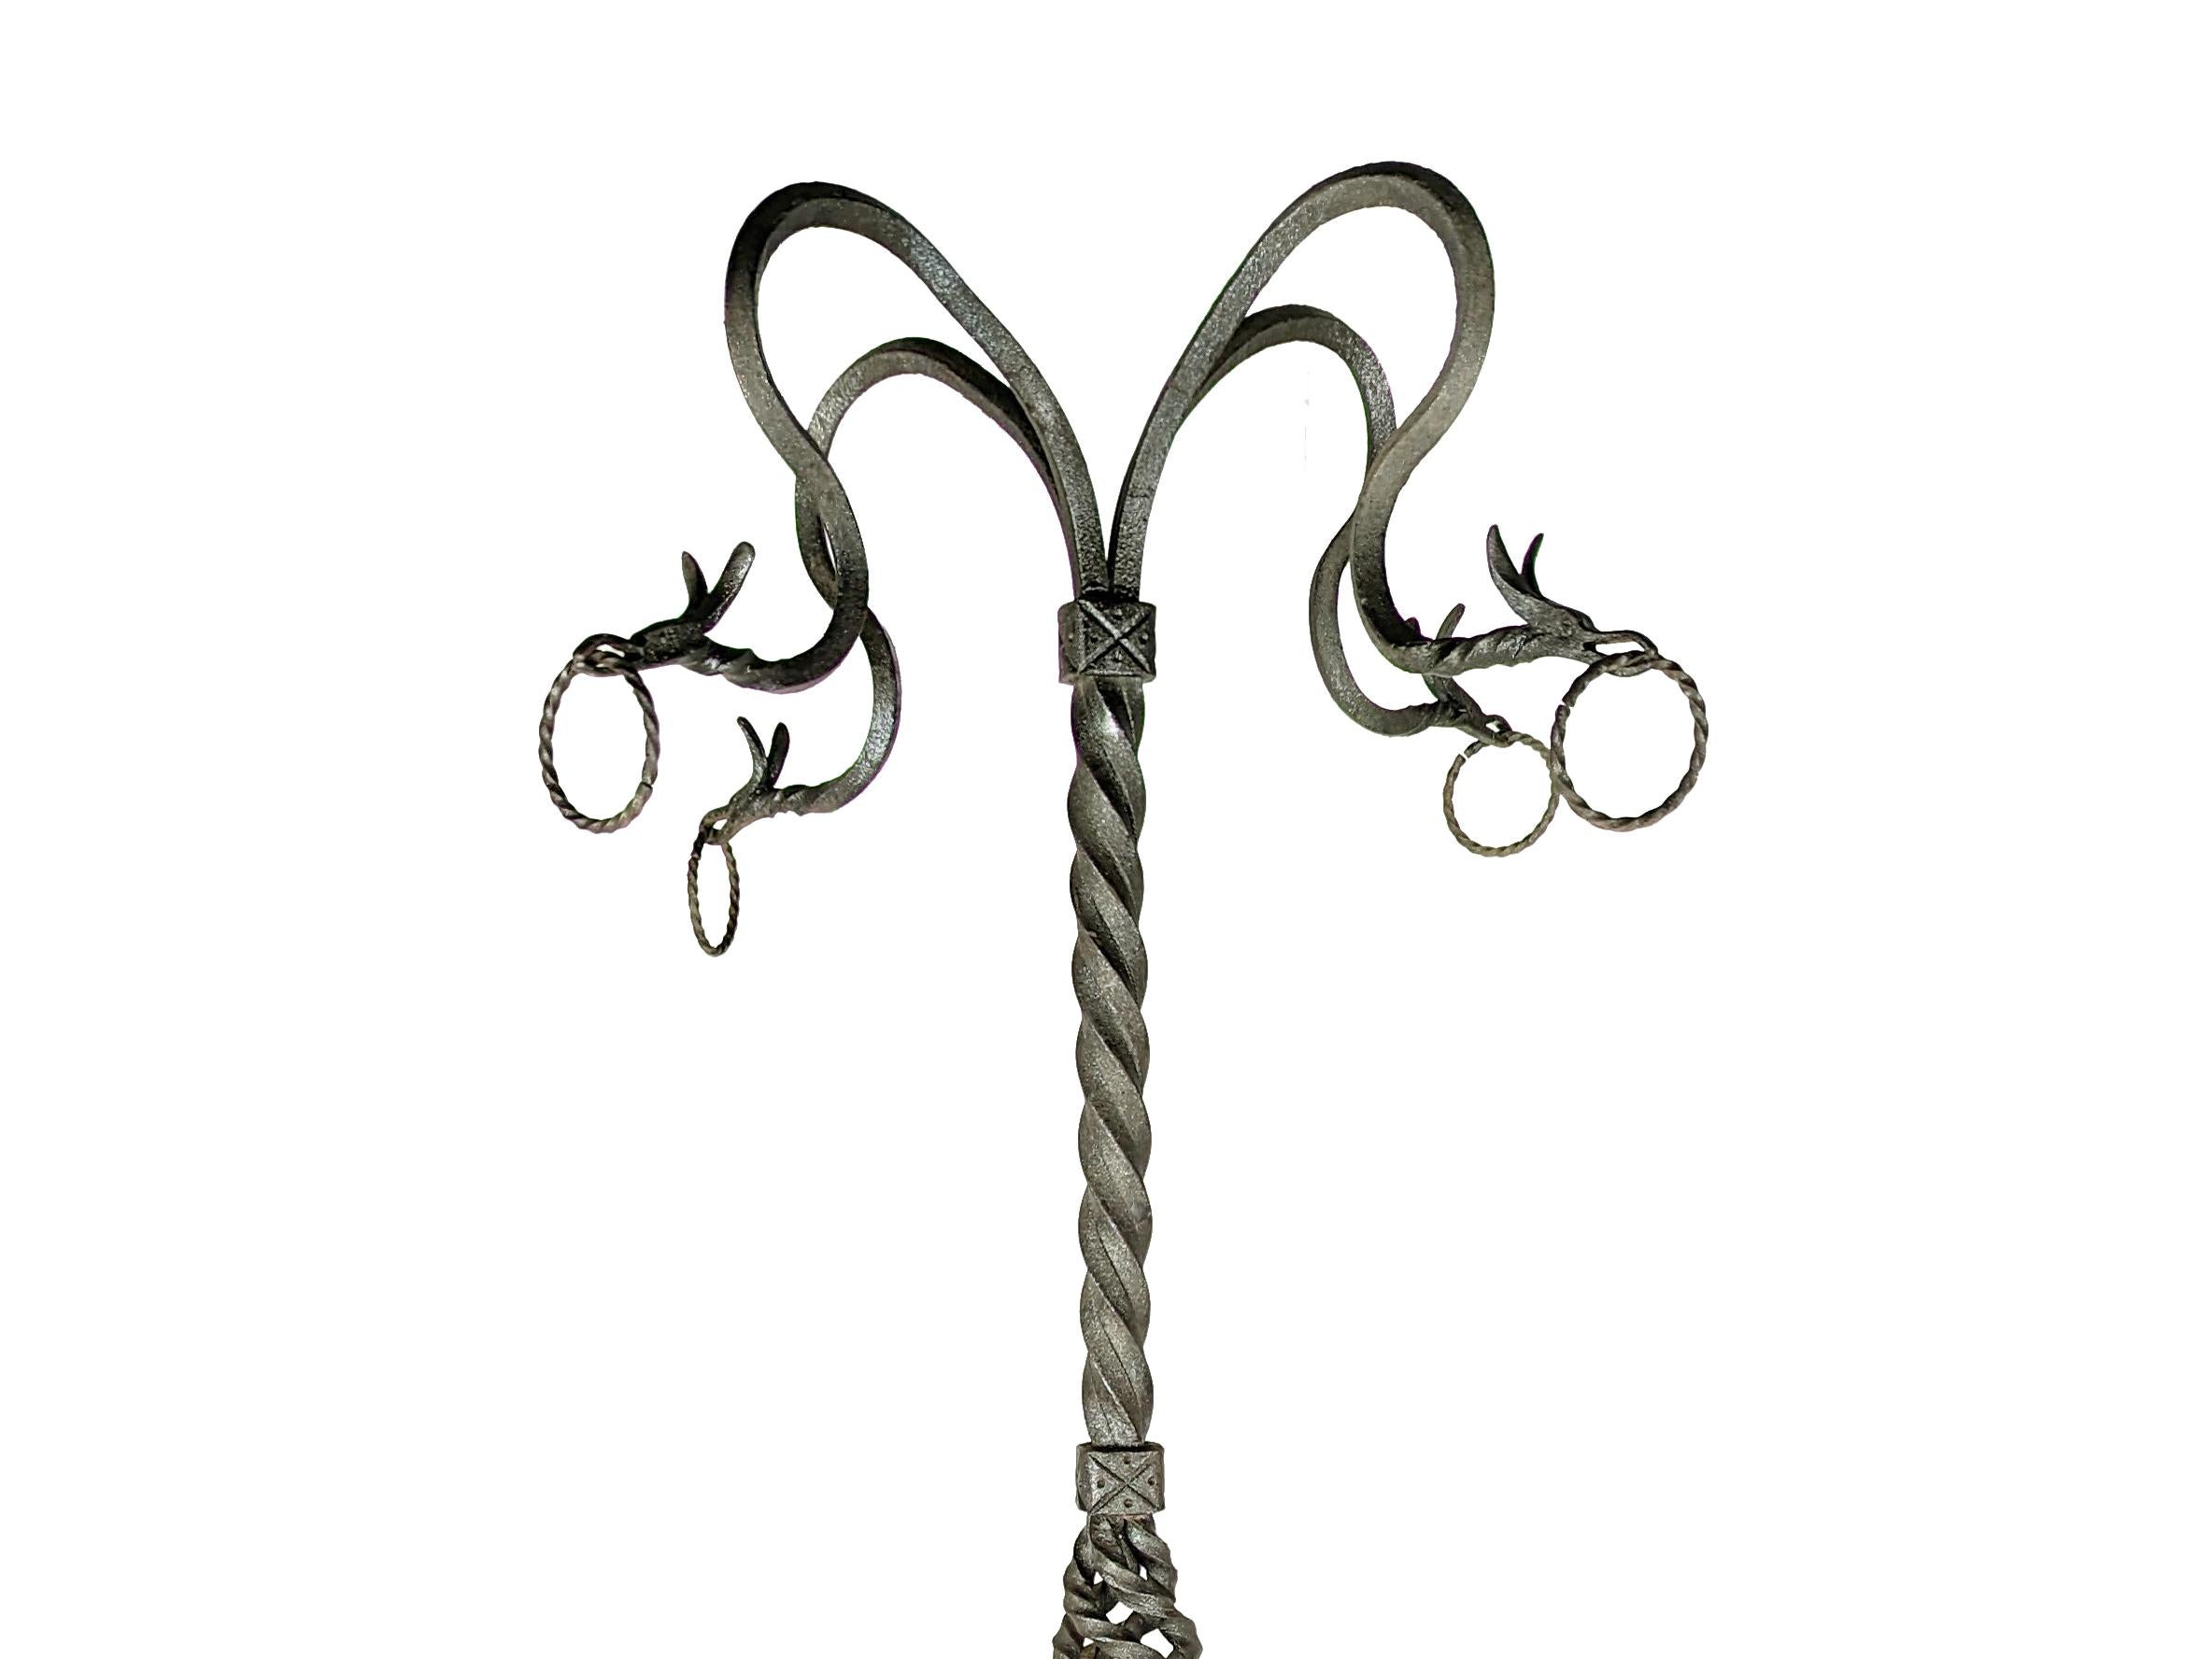 Rare hand-crafted wrought iron pedestal from the early 1900s attributed to Alessandro Mazzucotelli. The pedestal comes from an elegant apartment in Milan created and decorated by Alessandro Mazzucotelli in the first decades of the 20th century.
This